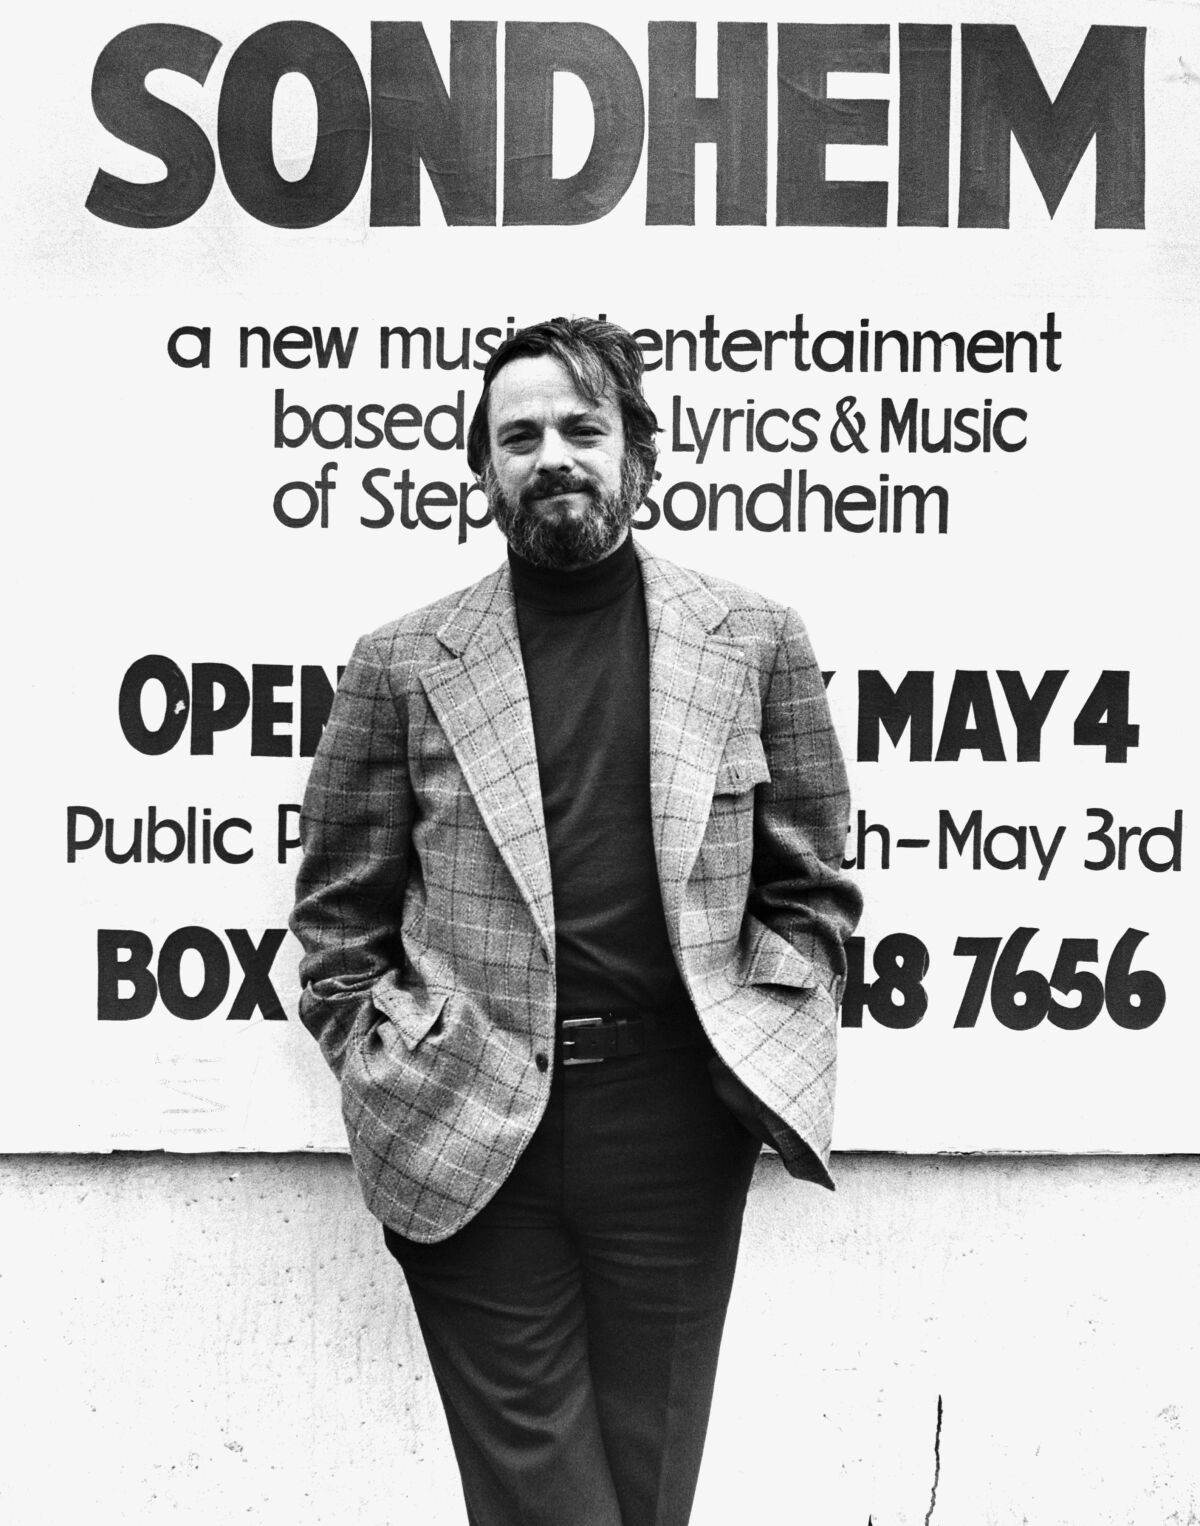 Stephen Sondheim stands in front of an advertisement for one of his shows.